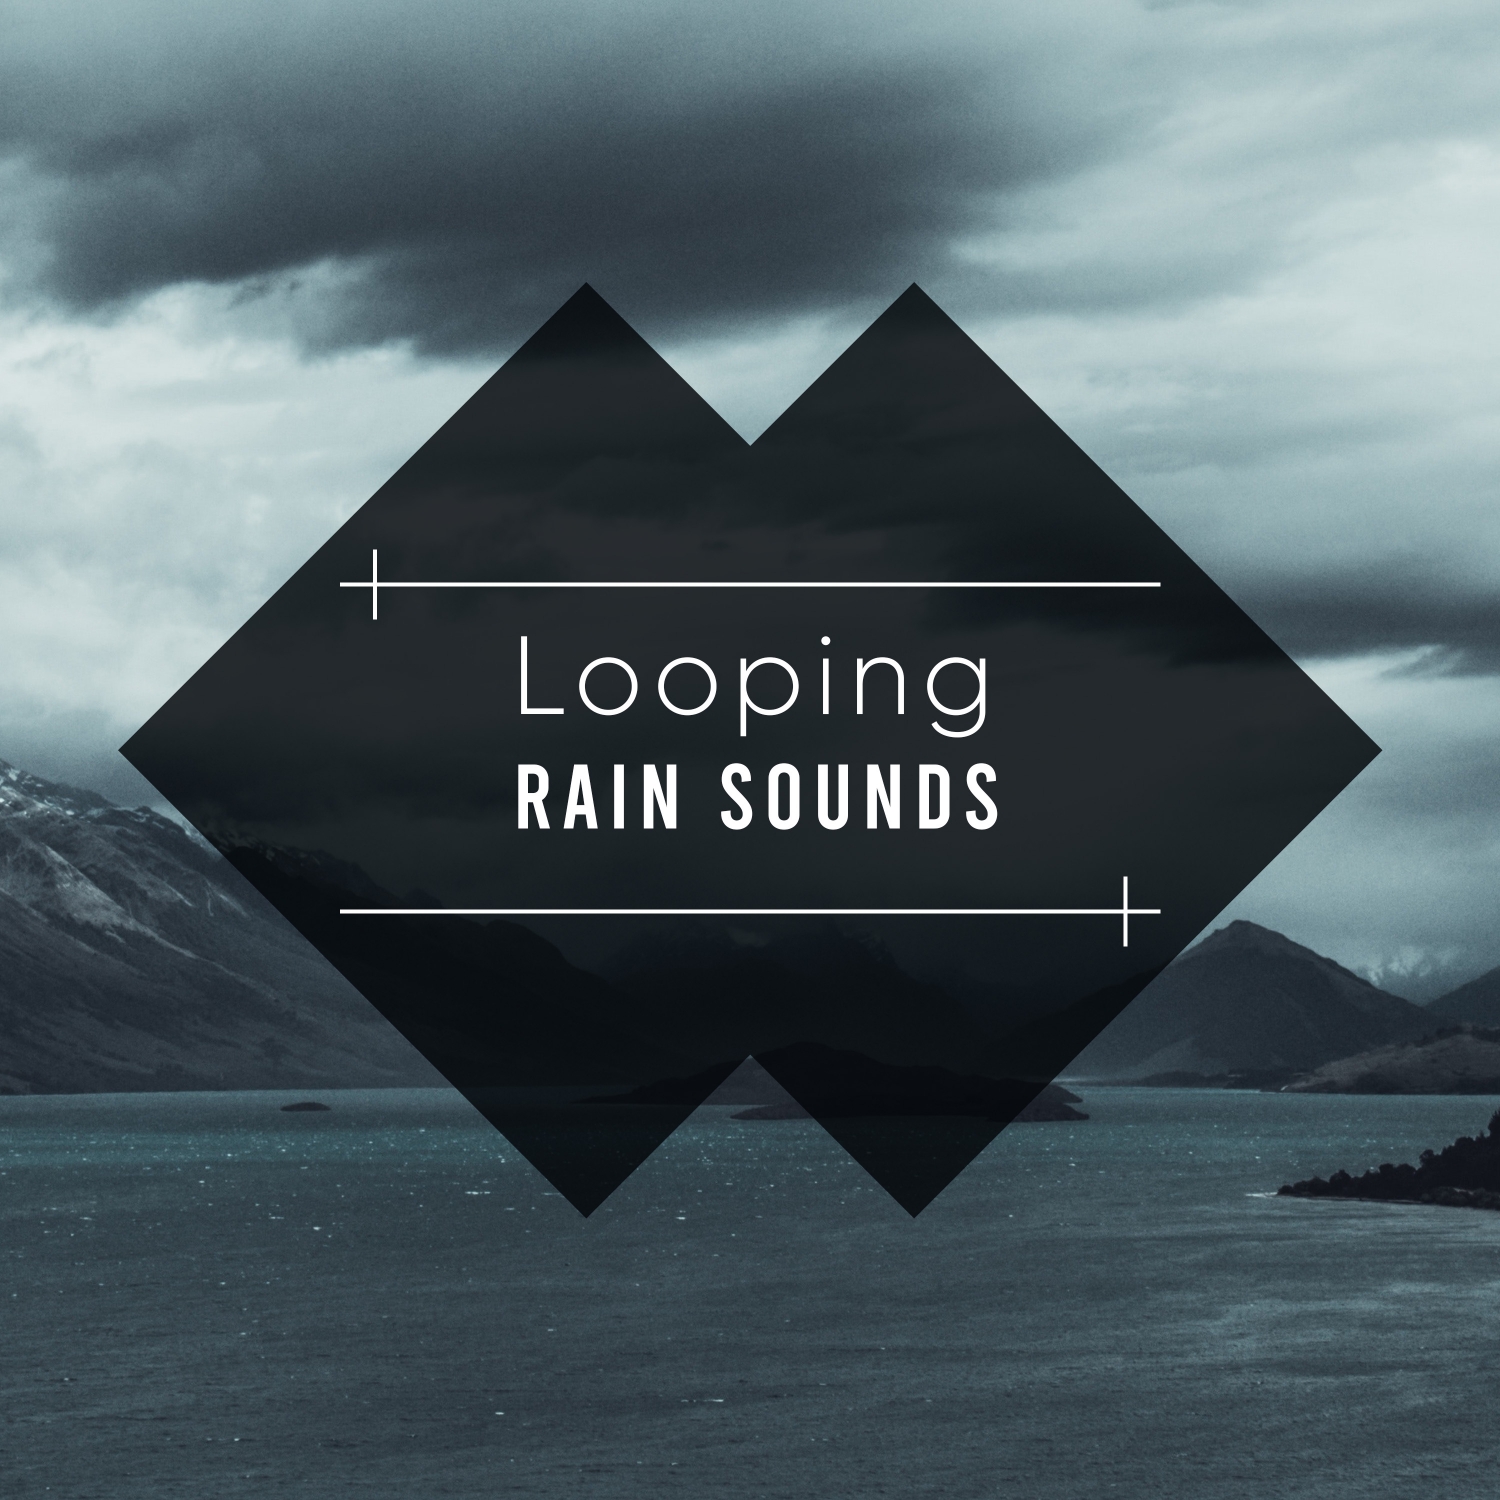 14 Looping Rain Sounds for Ultimate Relaxation